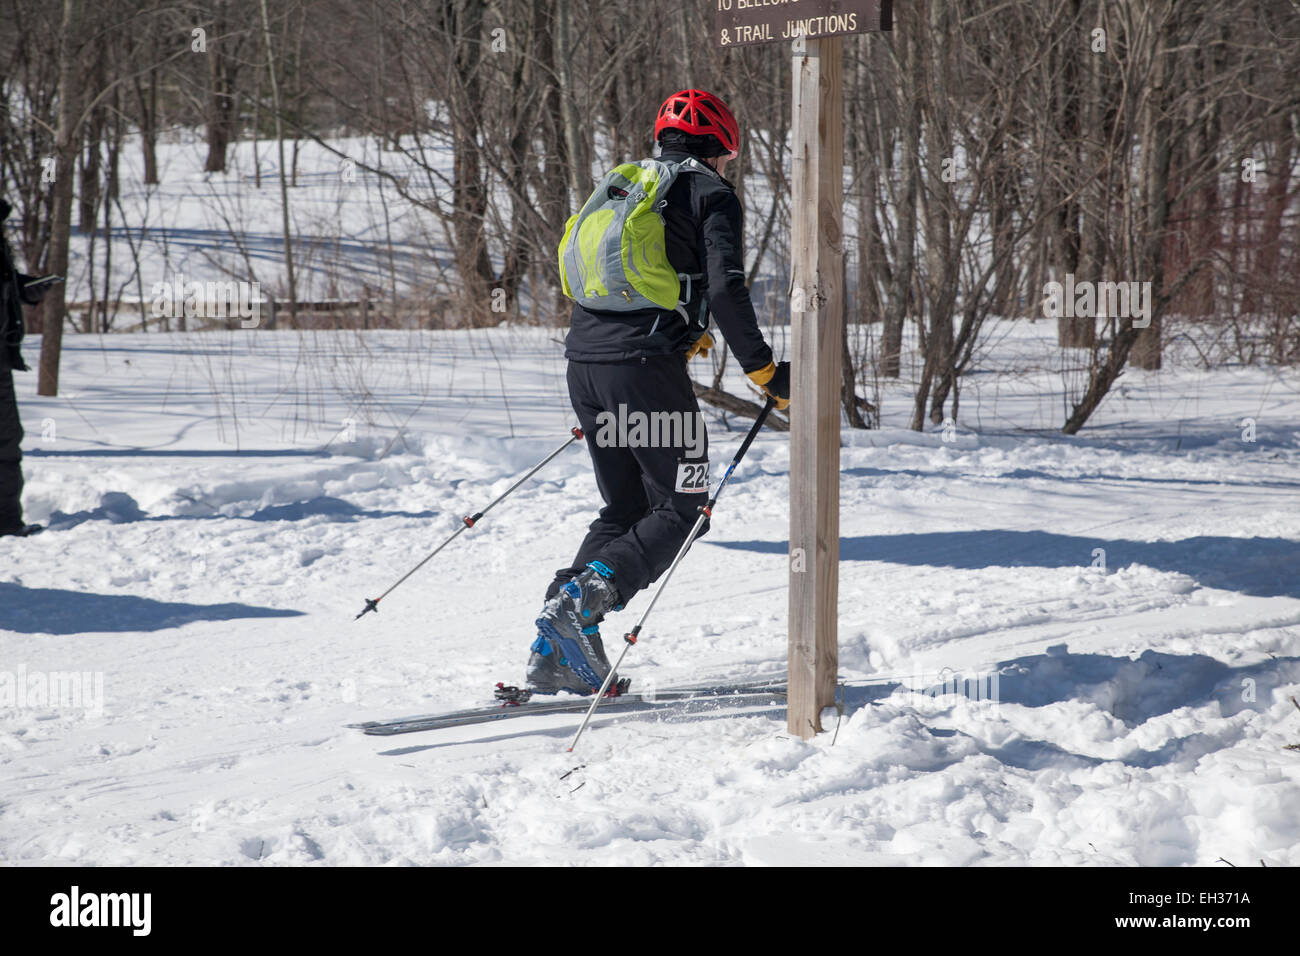 A skier at the halfway mark ready to climb  at the Thunderbolt Ski Race in March 2015 on Mount Greylock, Adams, MA. Stock Photo